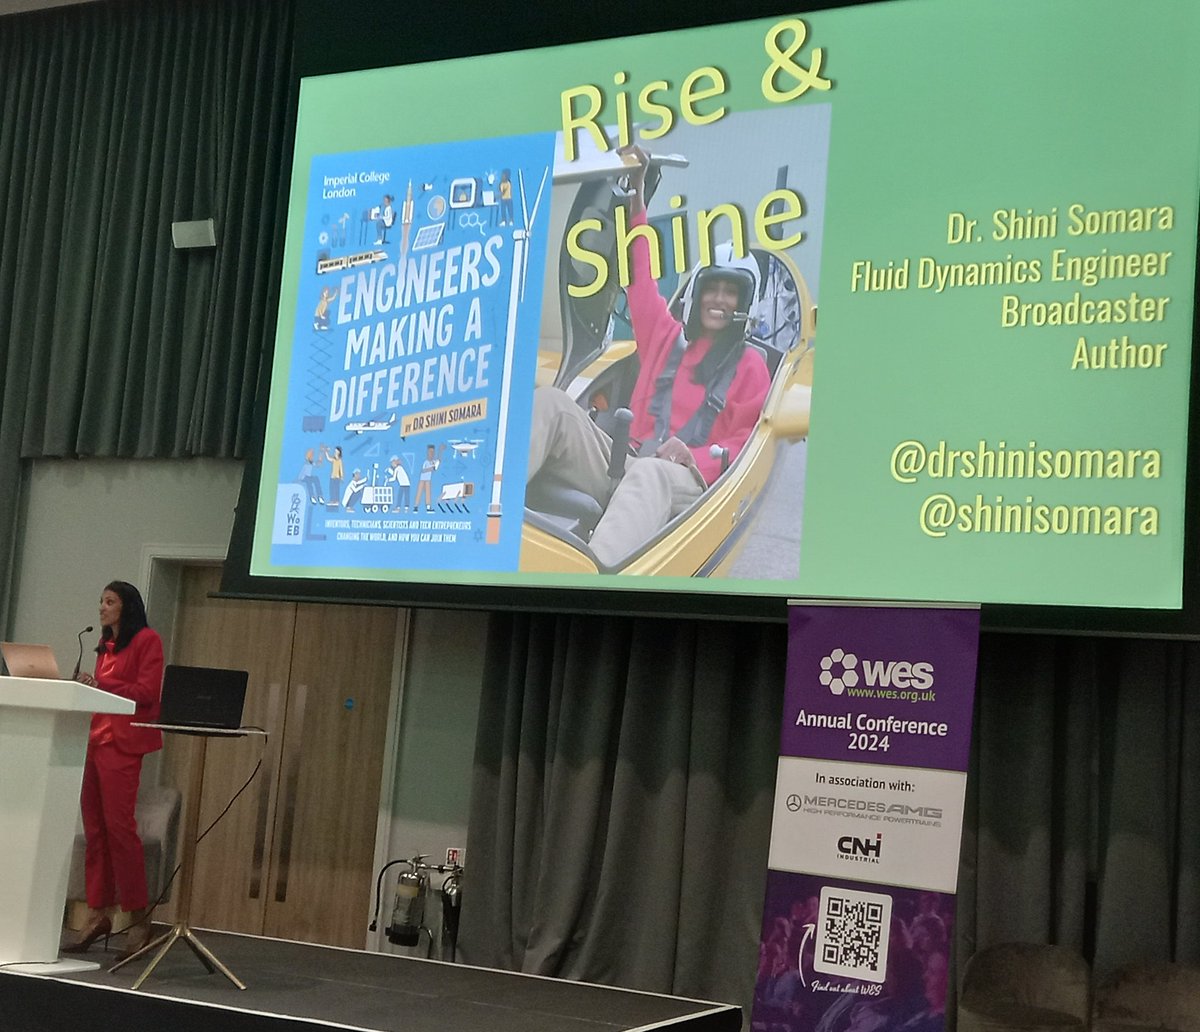 Opening talk @WES1919 with @shinisomara challenging engineers to dig deep and embrace our differences to make a difference #WESAnnualConference #WomenInEngineering